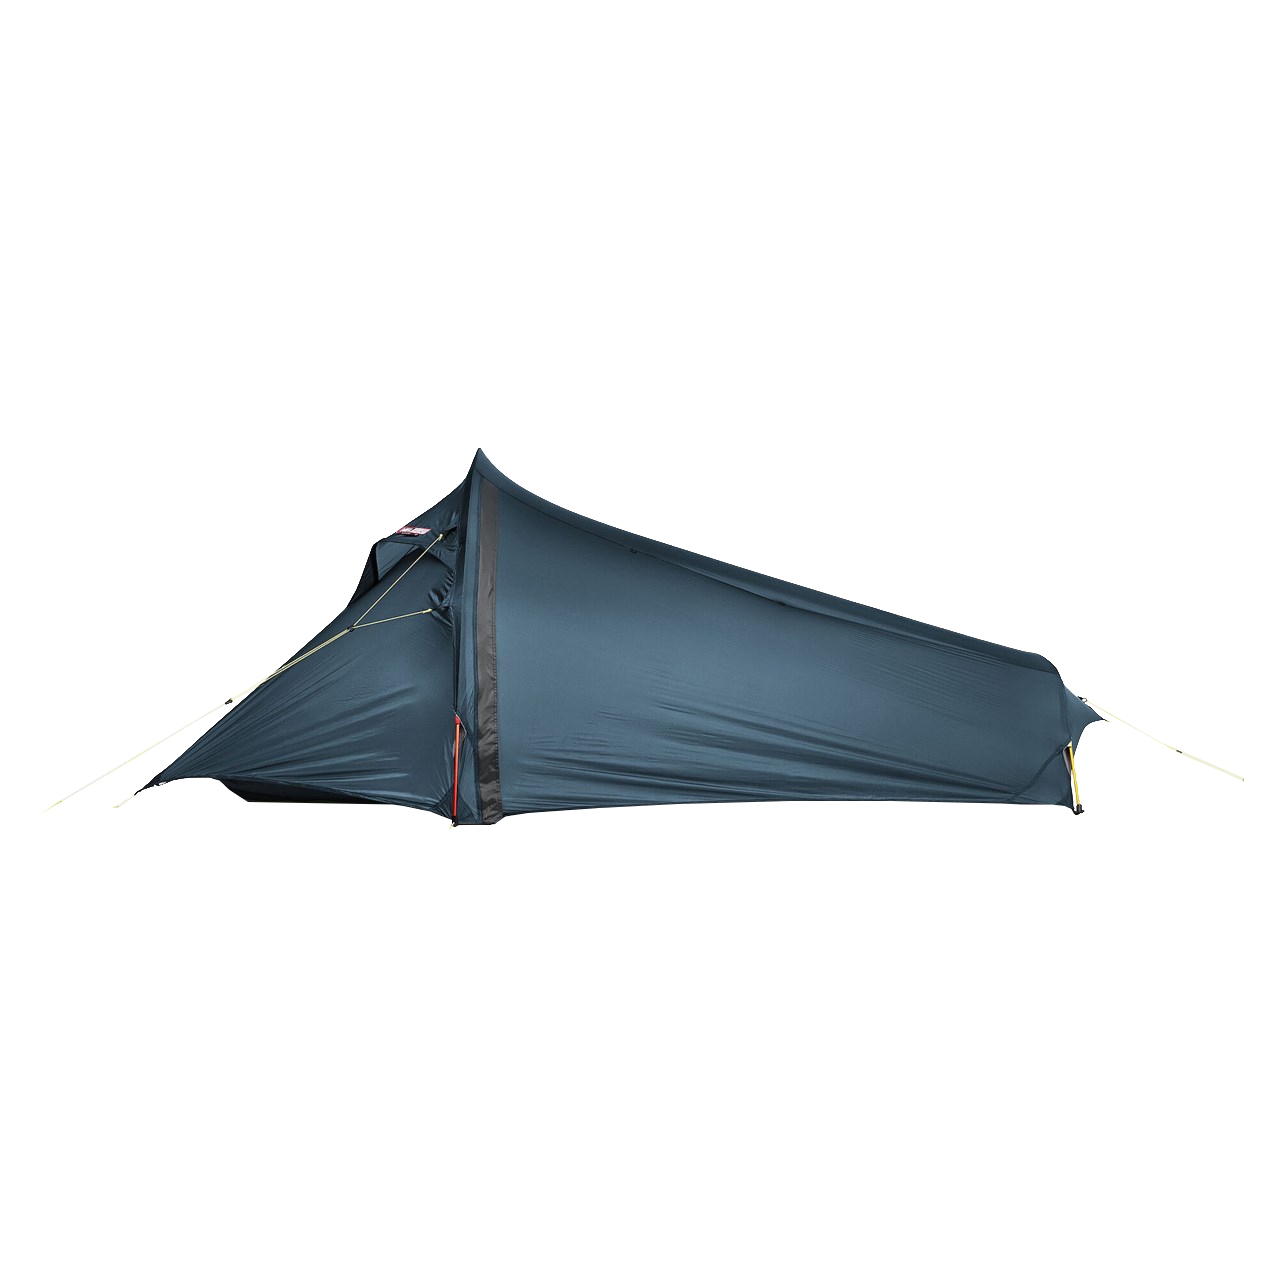 Picture of Helsport Ringstind Superlight 2 Tent